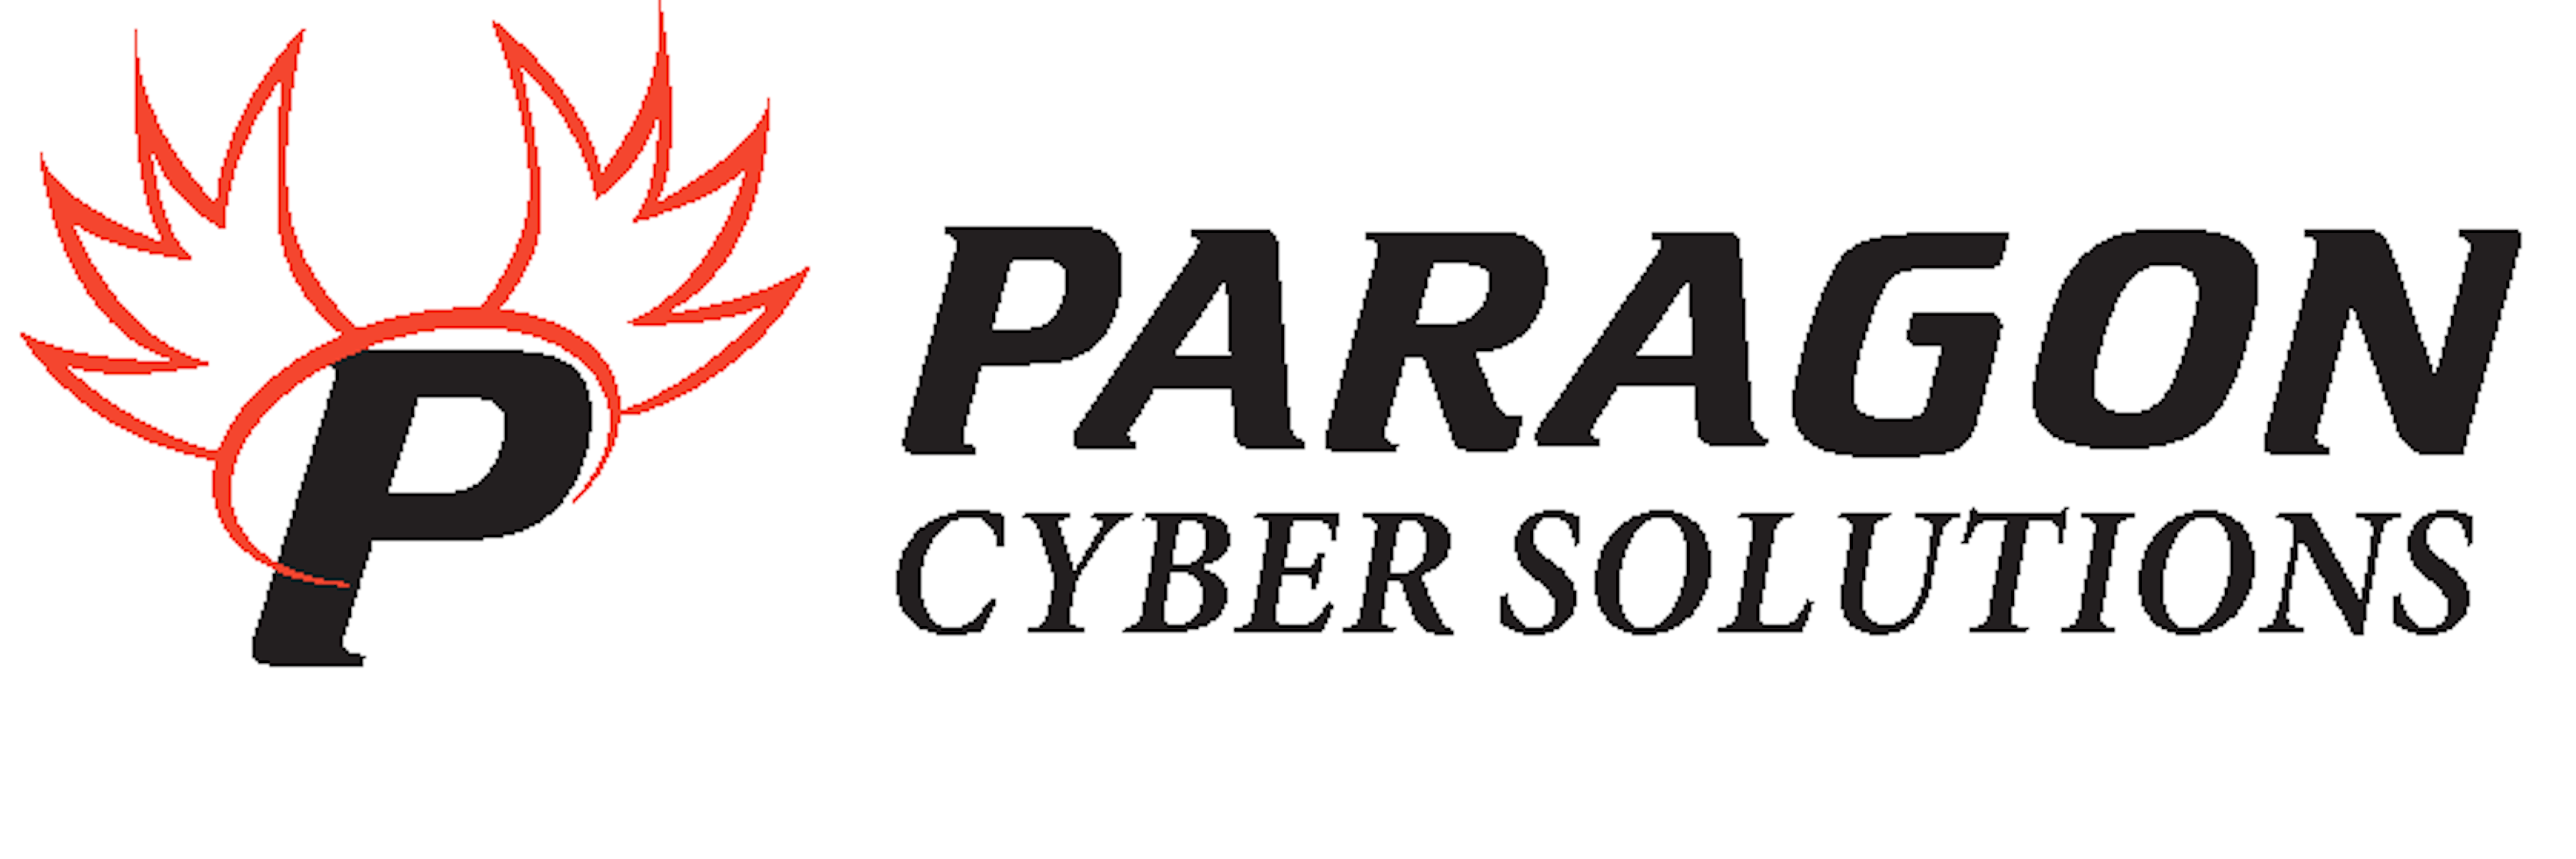 Paragon Cyber Solutions